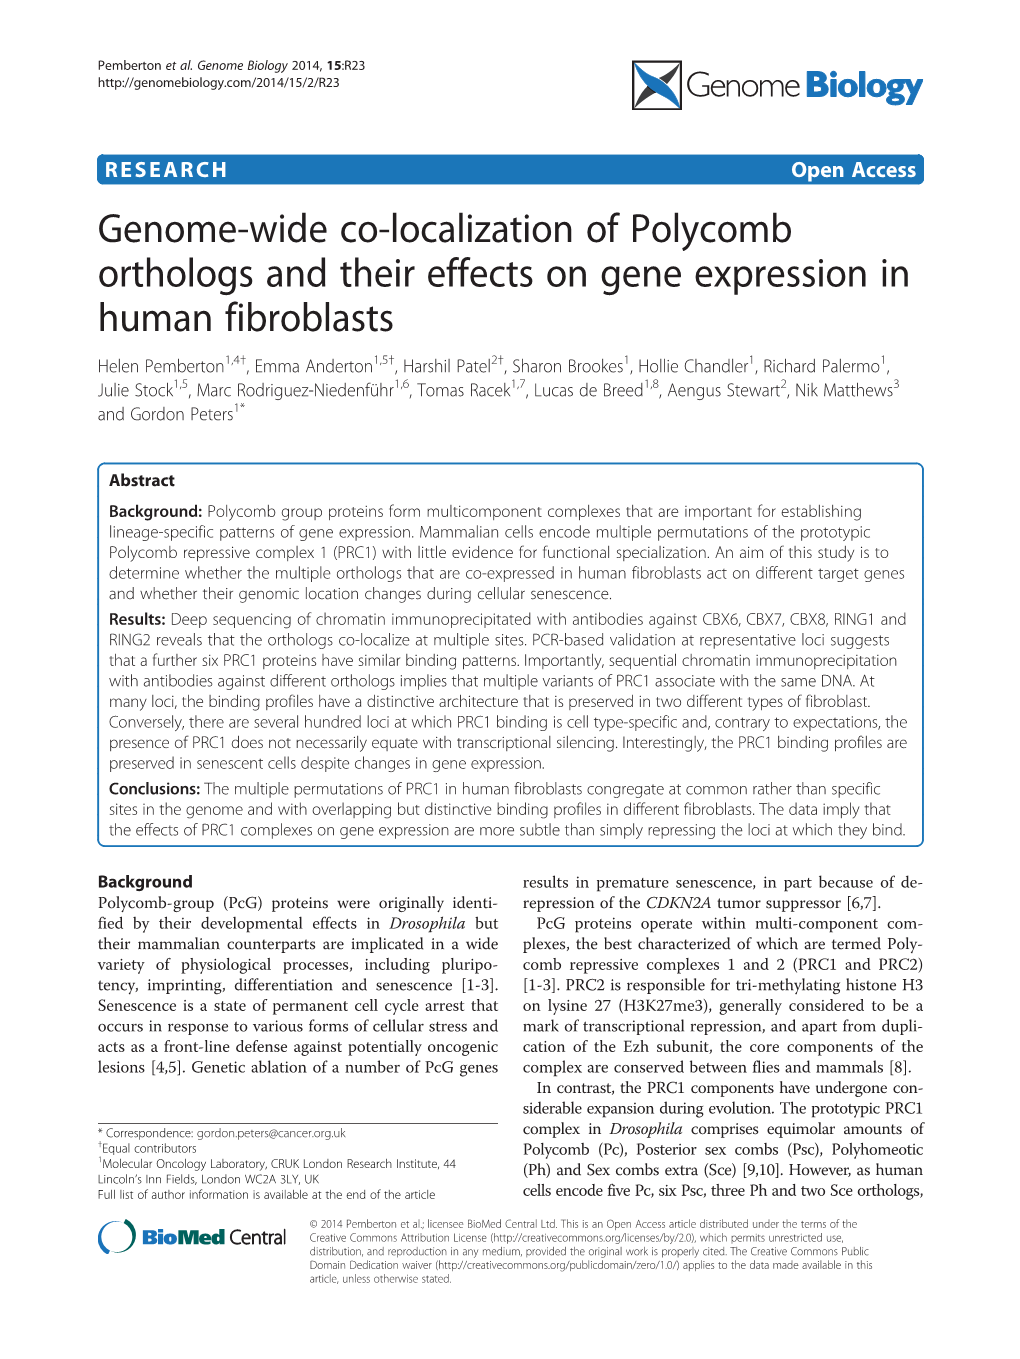 Genome-Wide Co-Localization of Polycomb Orthologs and Their Effects on Gene Expression in Human Fibroblasts